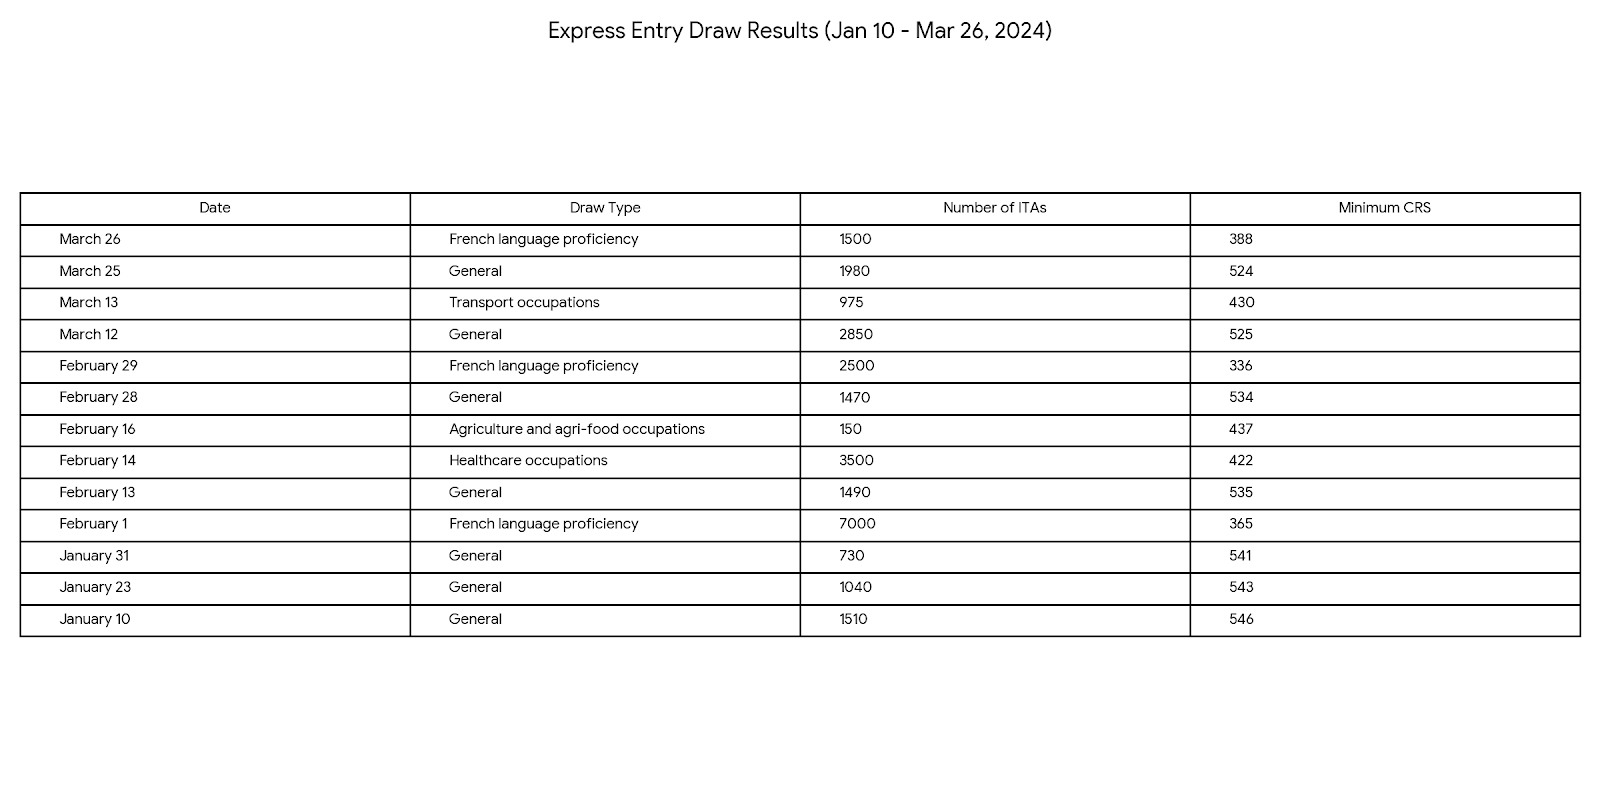 Summary of Express Entry draw results in 2024